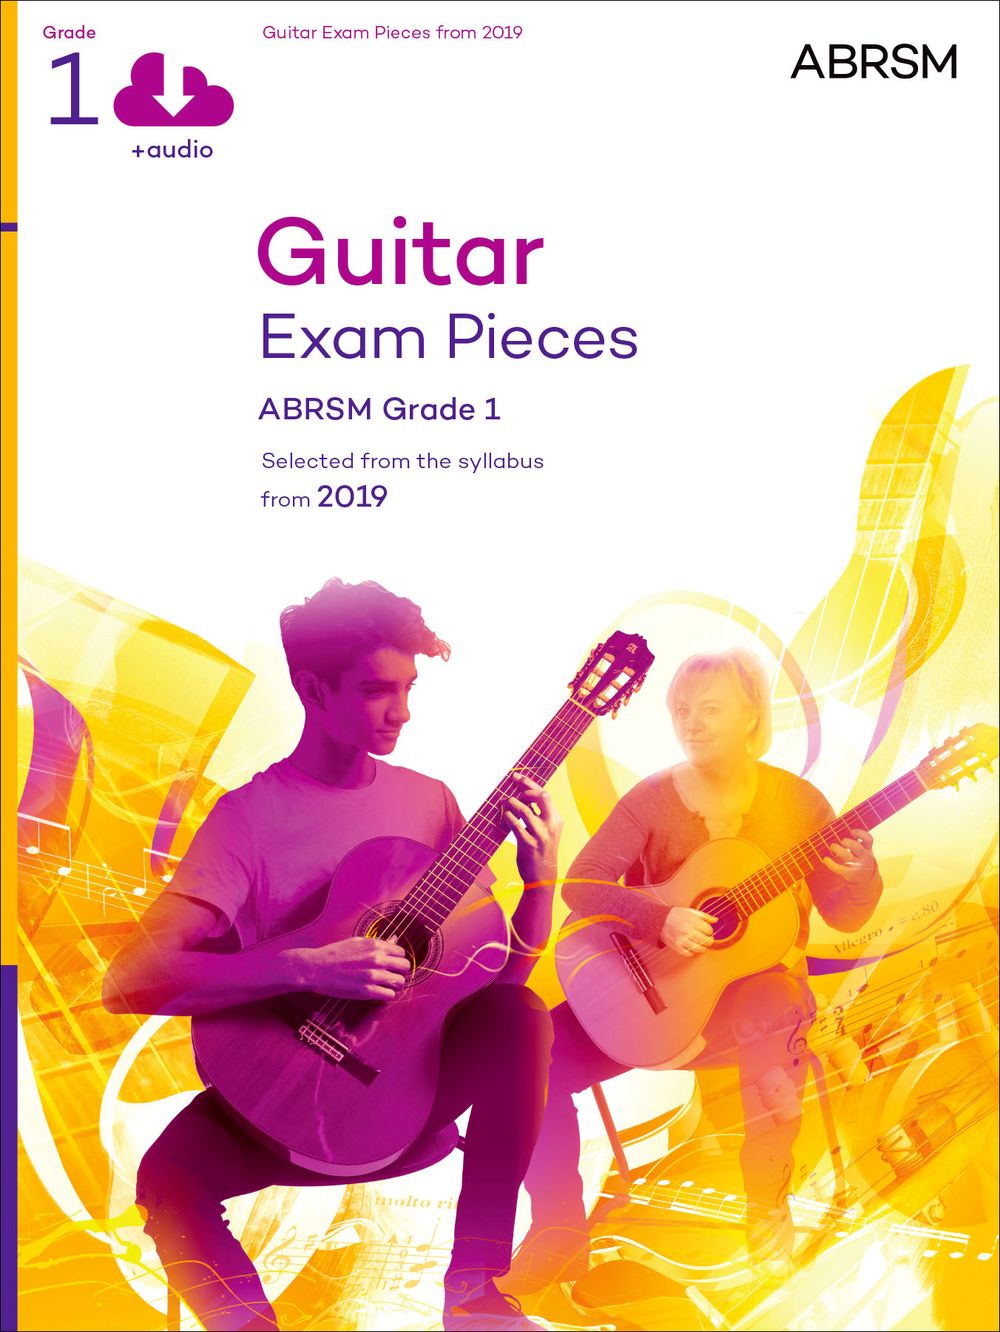 Guitar Exam Pieces From 2019 Grade 1 +audio Abrsm Sheet Music Songbook